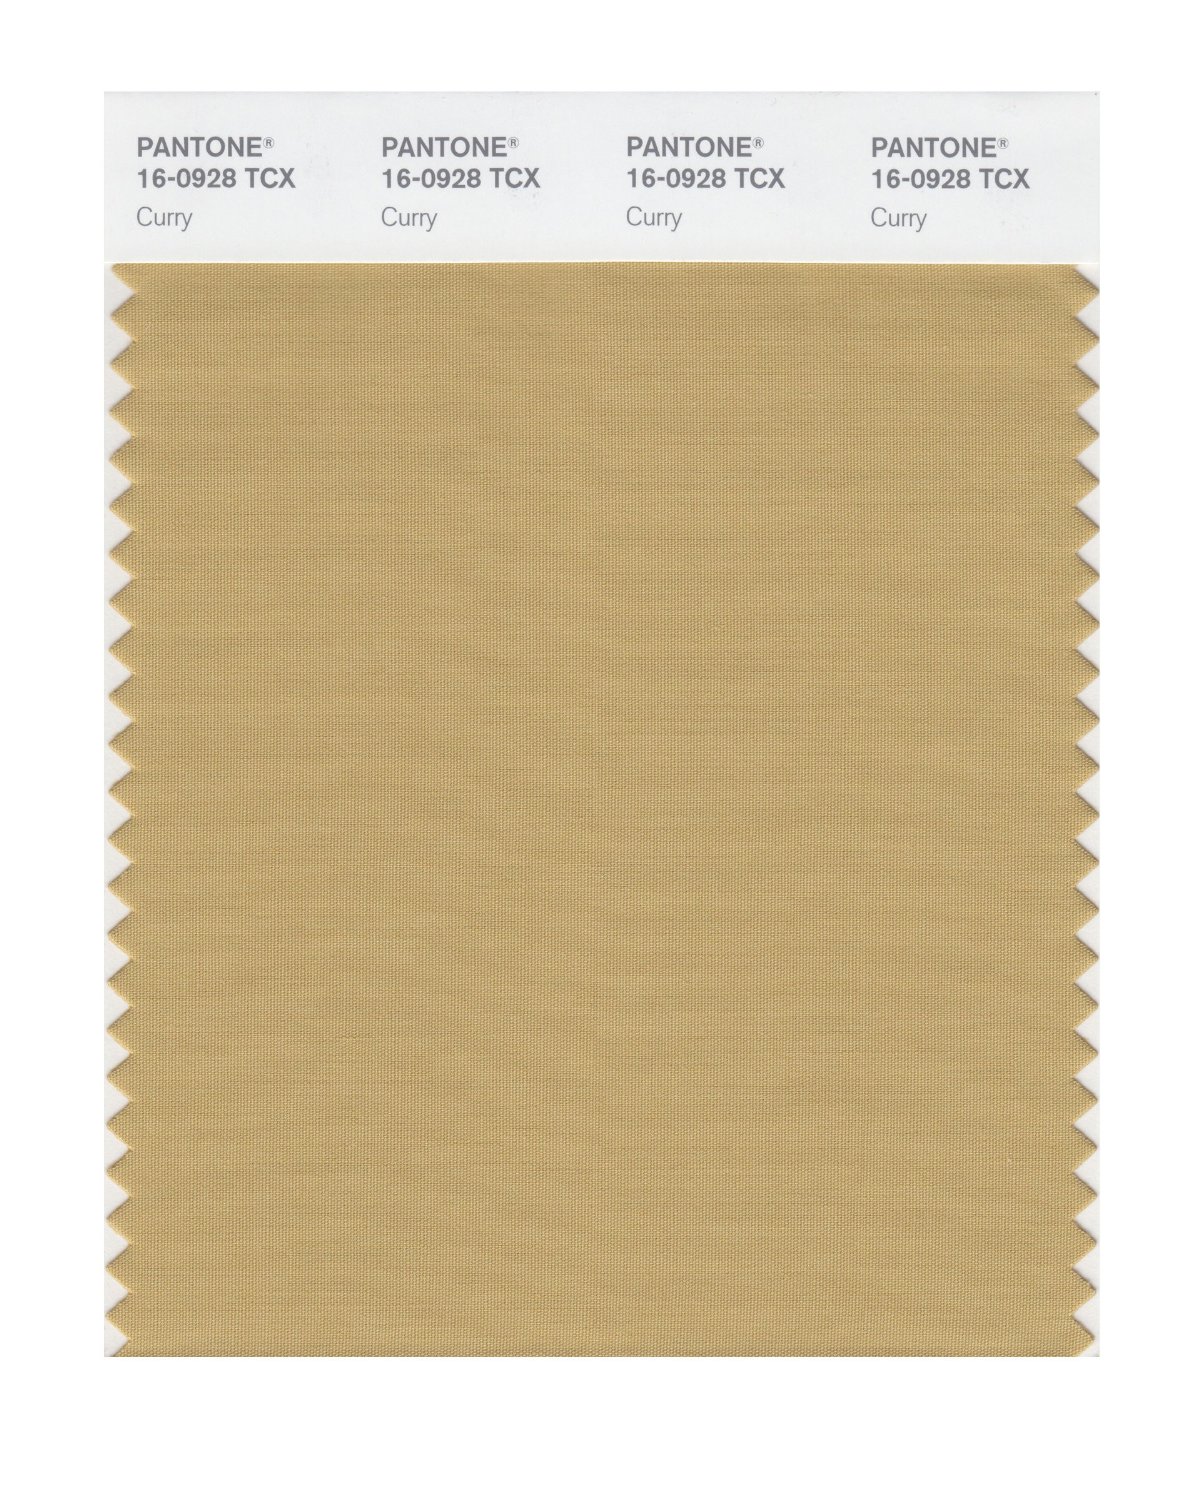 Pantone Cotton Swatch 16-0928 Curry